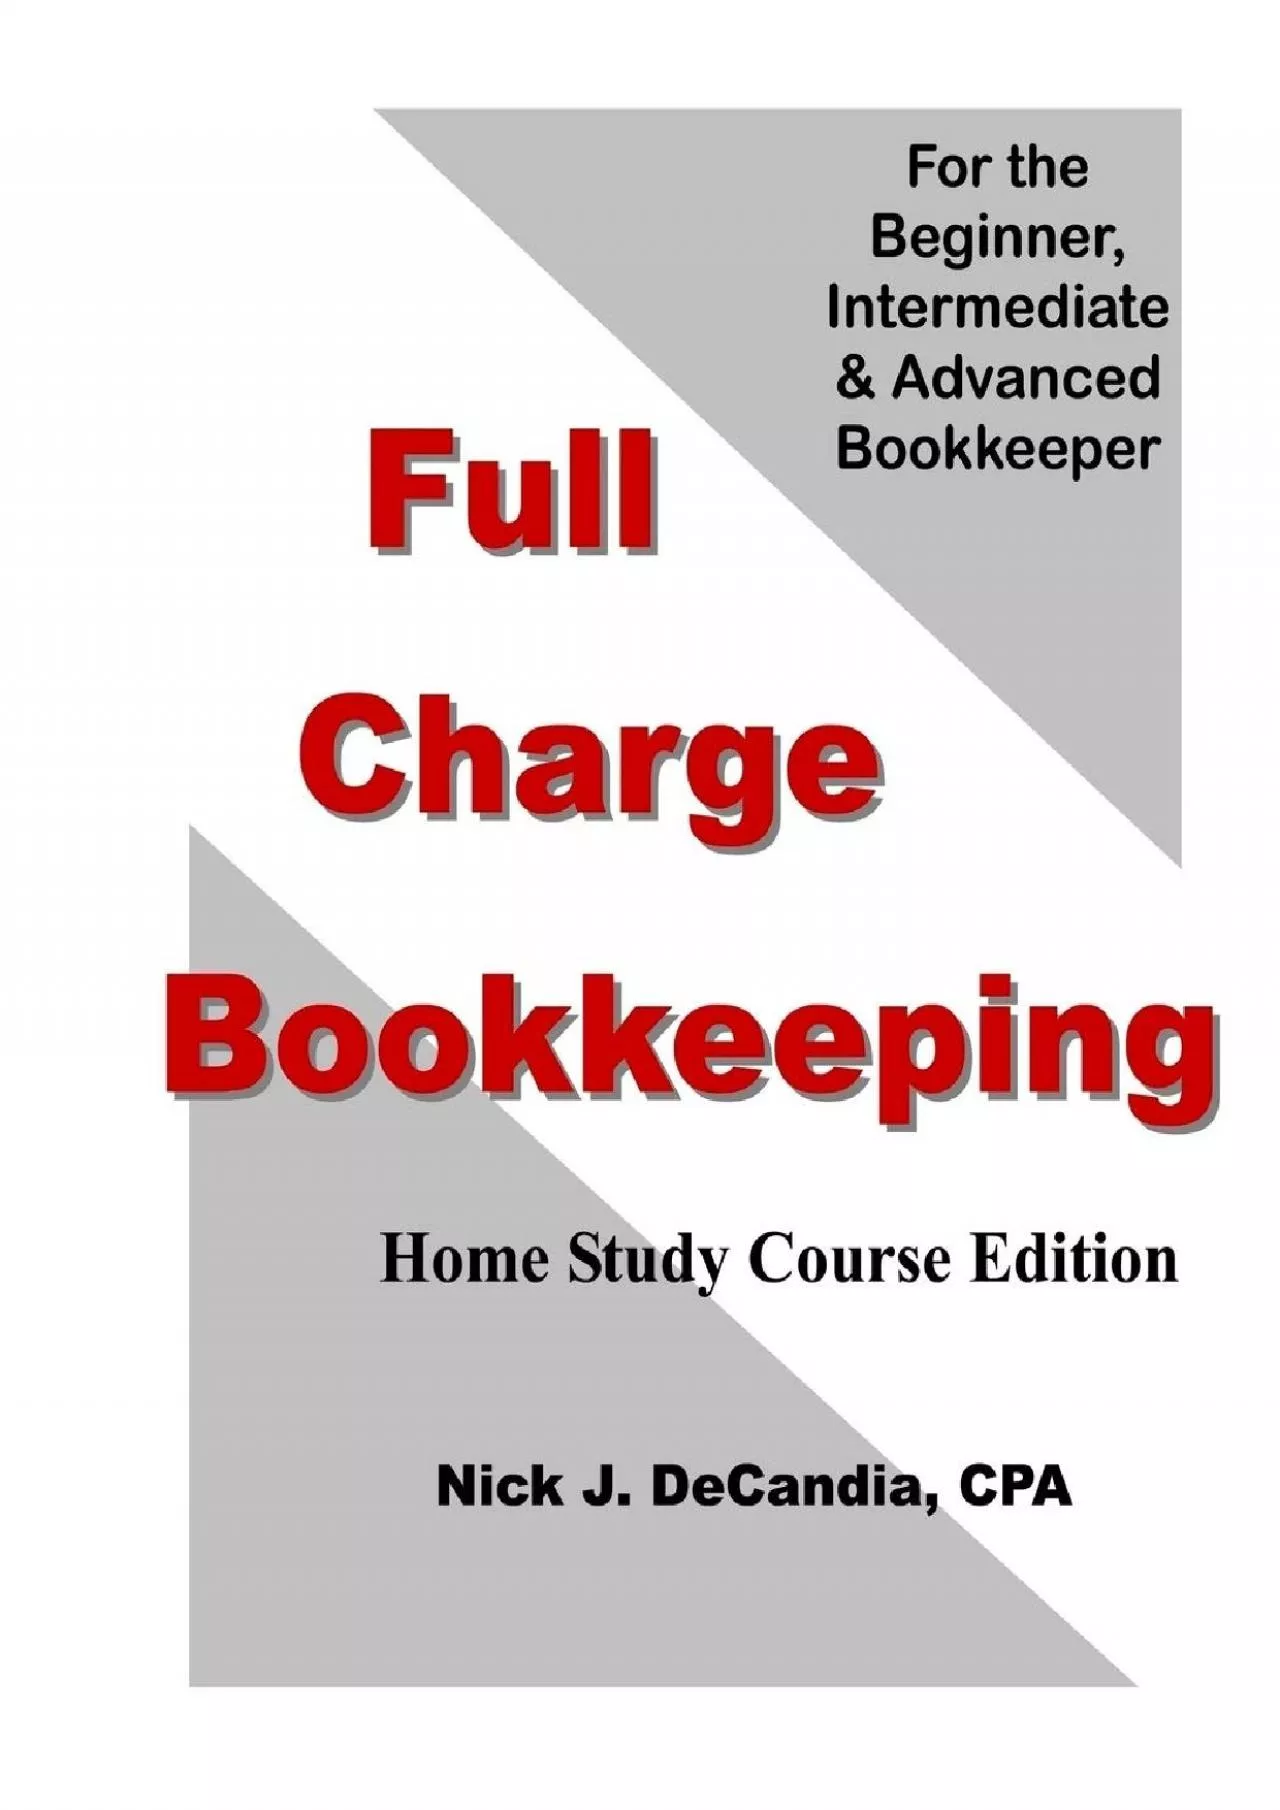 (BOOK)-Full Charge Bookkeeping, HOME STUDY COURSE EDITION: For the Beginner, Intermediate